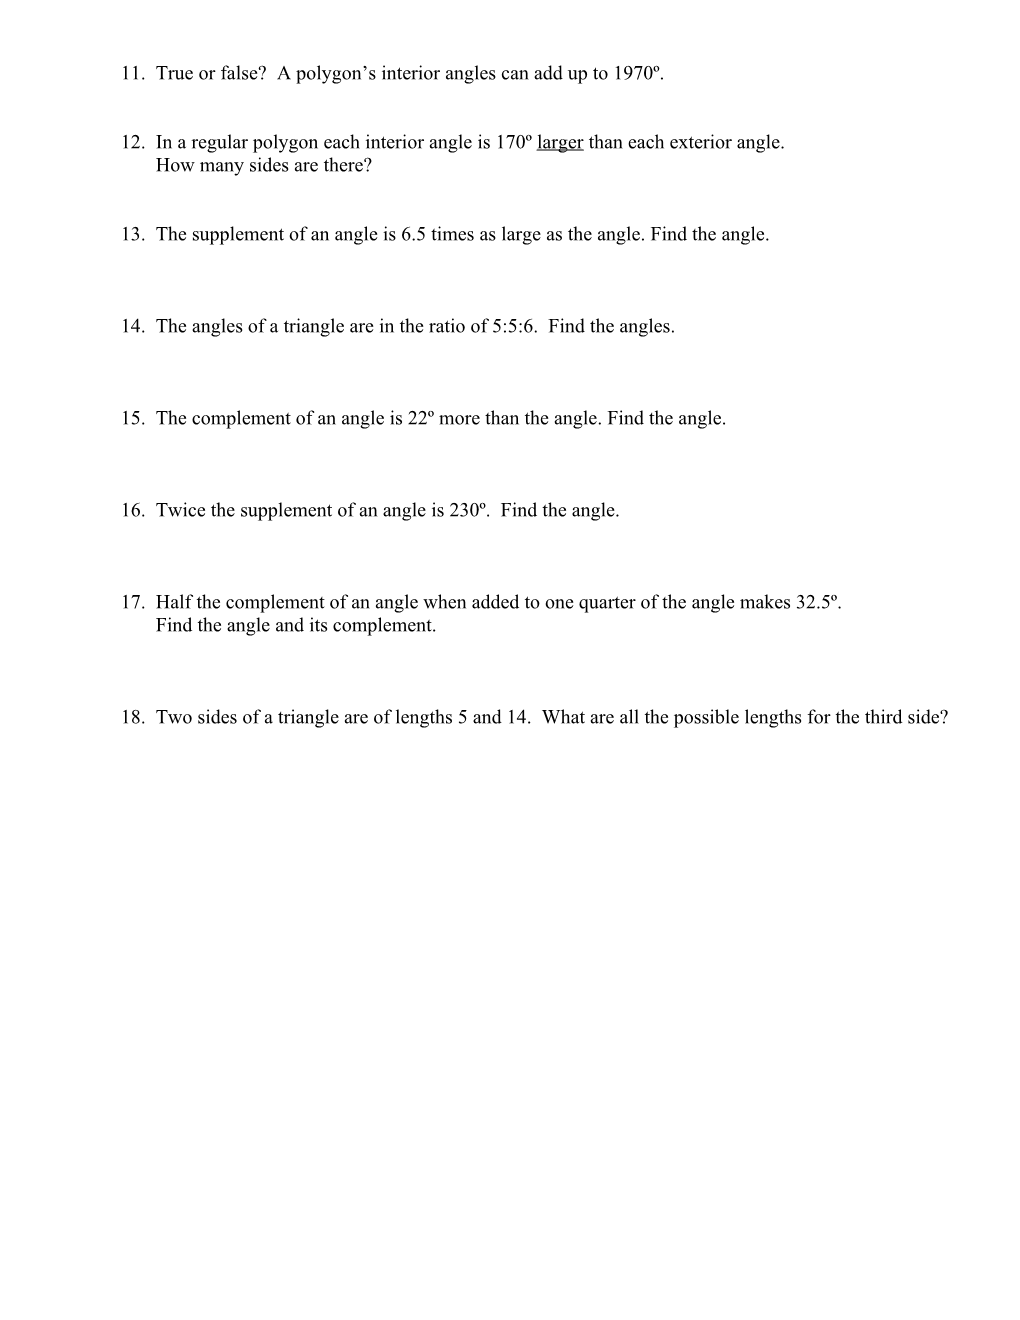 Level 1 Geometry Review 1: Angles and Polygons